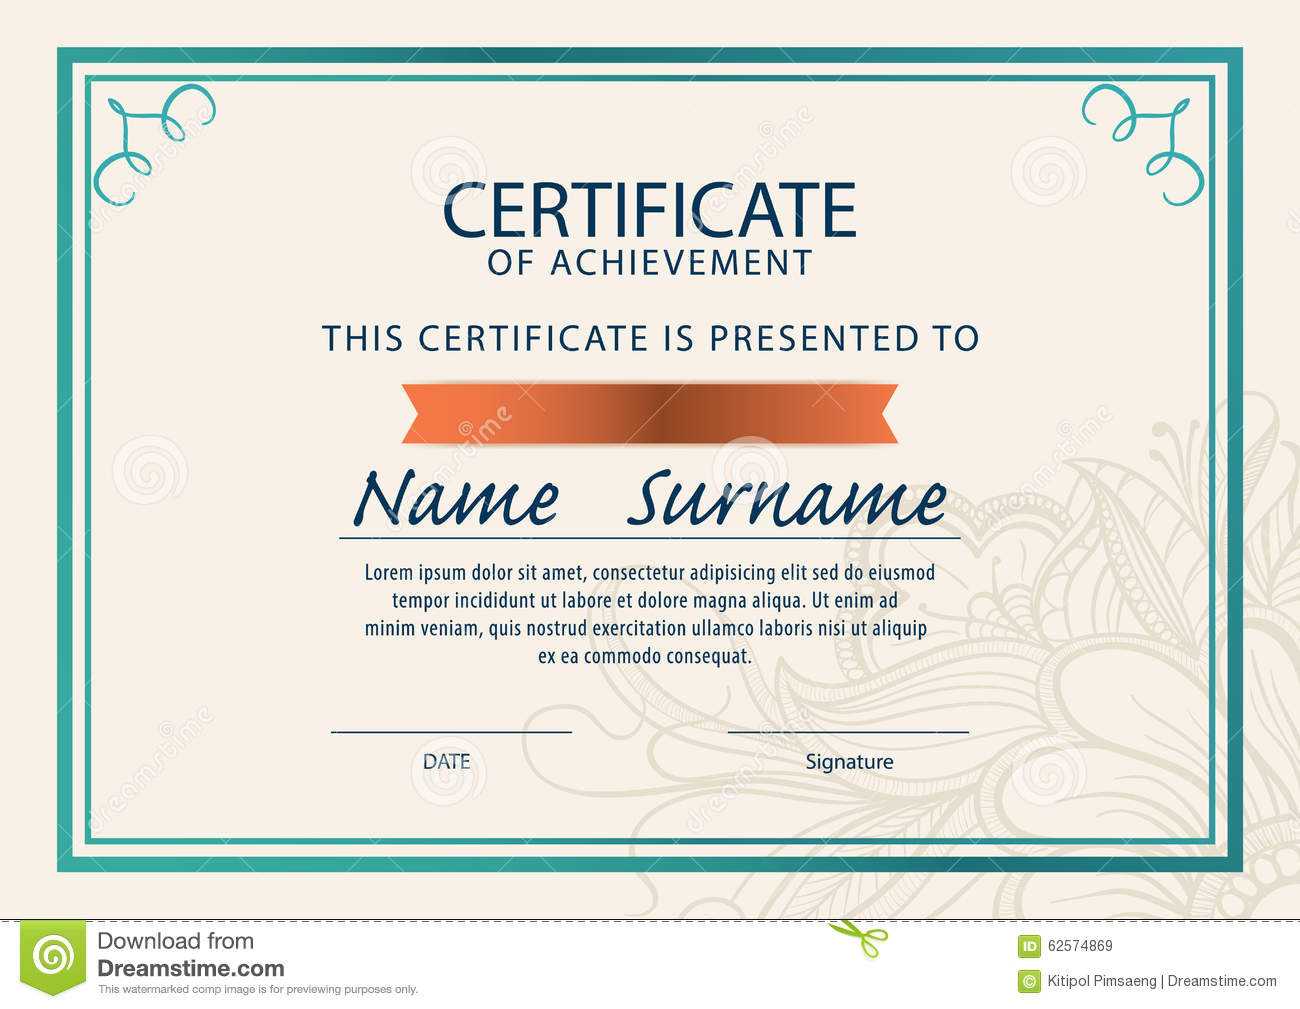 Certificate Template,diploma,a4 Size , Illustration 62574869 Throughout Certificate Template Size